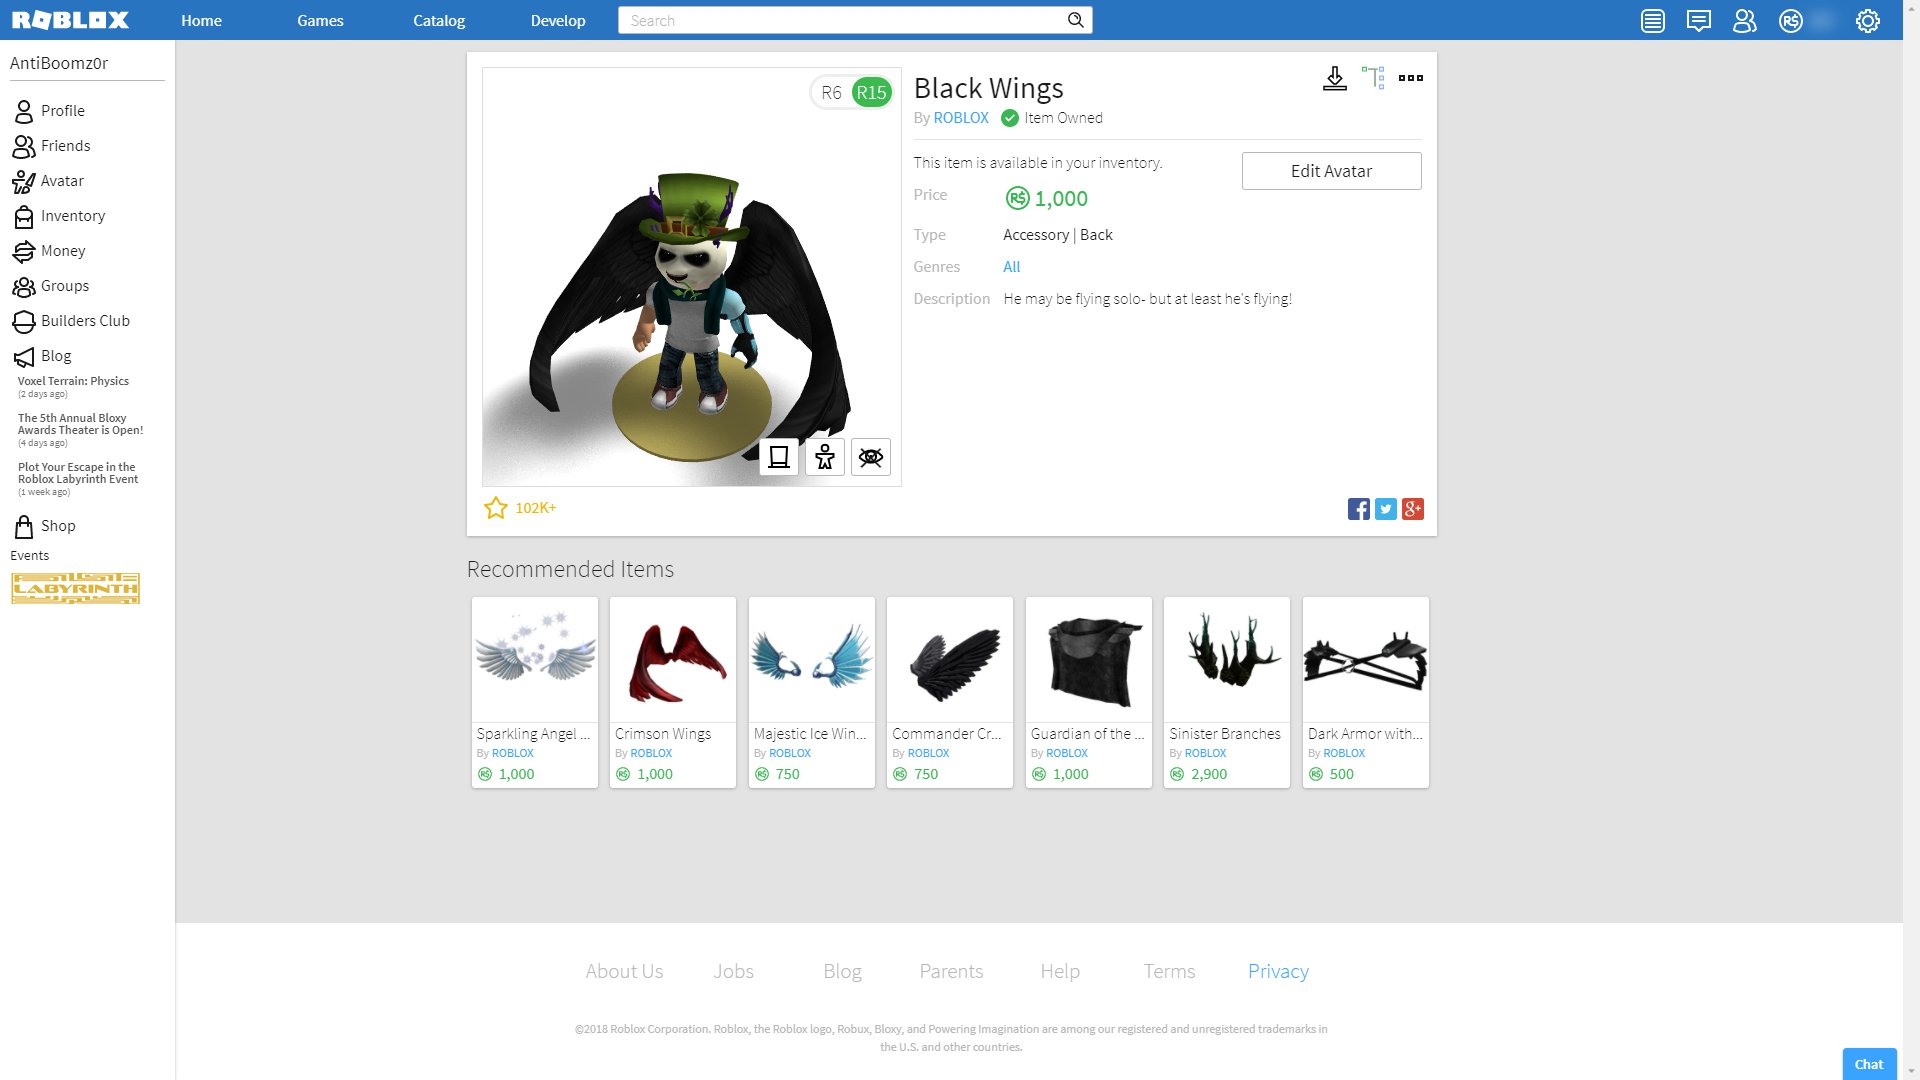 Anti On Twitter Released Btroblox My Roblox Chrome Extension To The Public Check It Out If You Re Interested In A Redesigned Profile Page Timestamps In Your Timezone Group Shout - bt roblox+ extension download